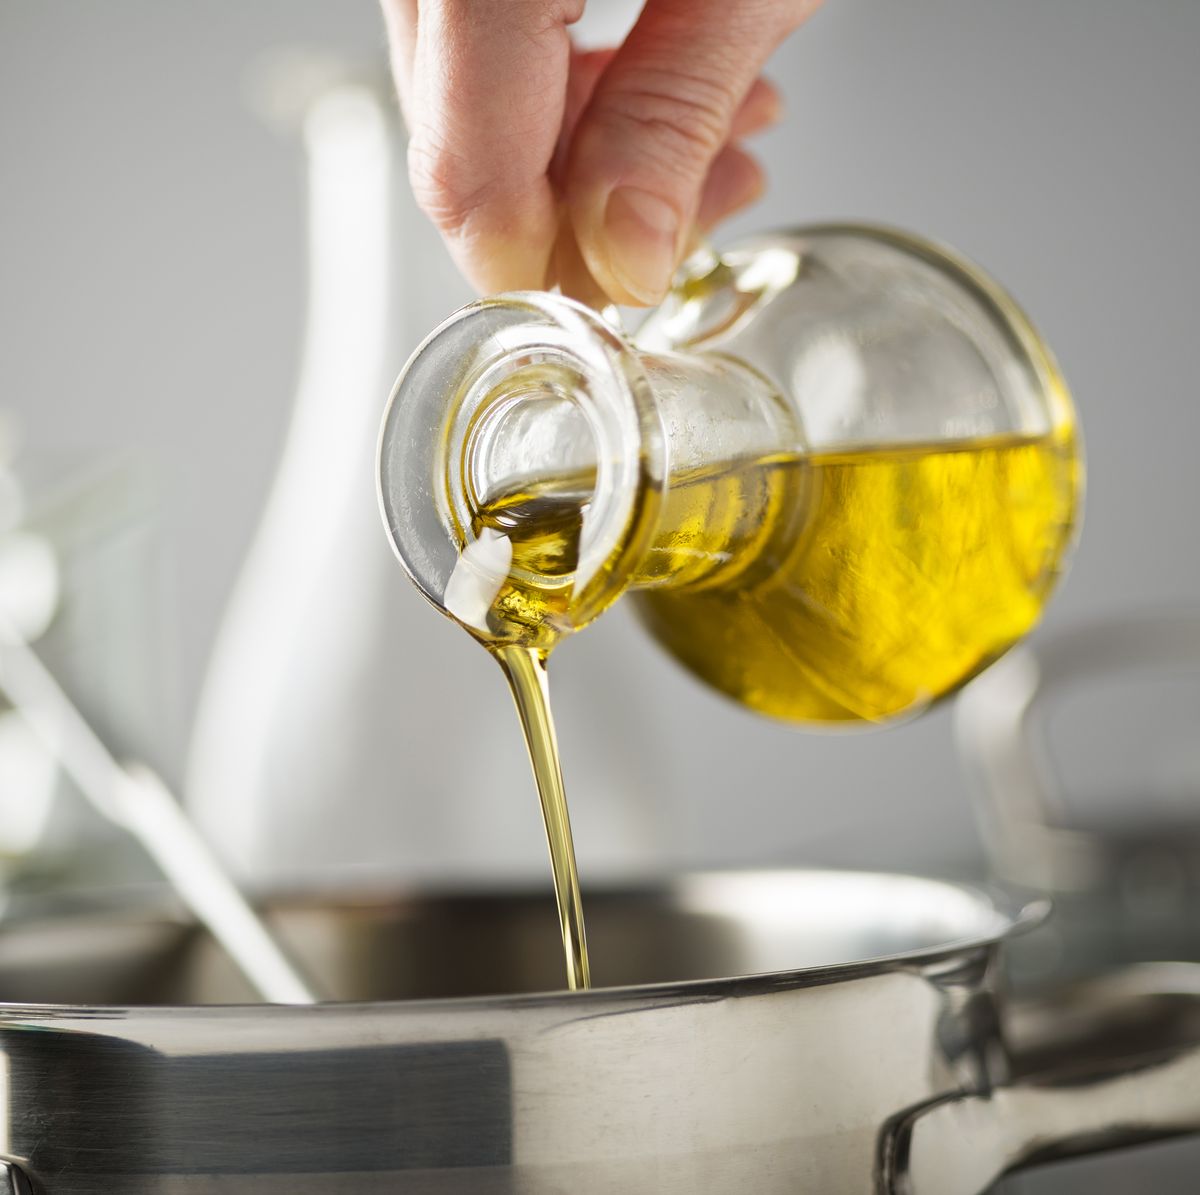 cooking meal in a pot with olive oil